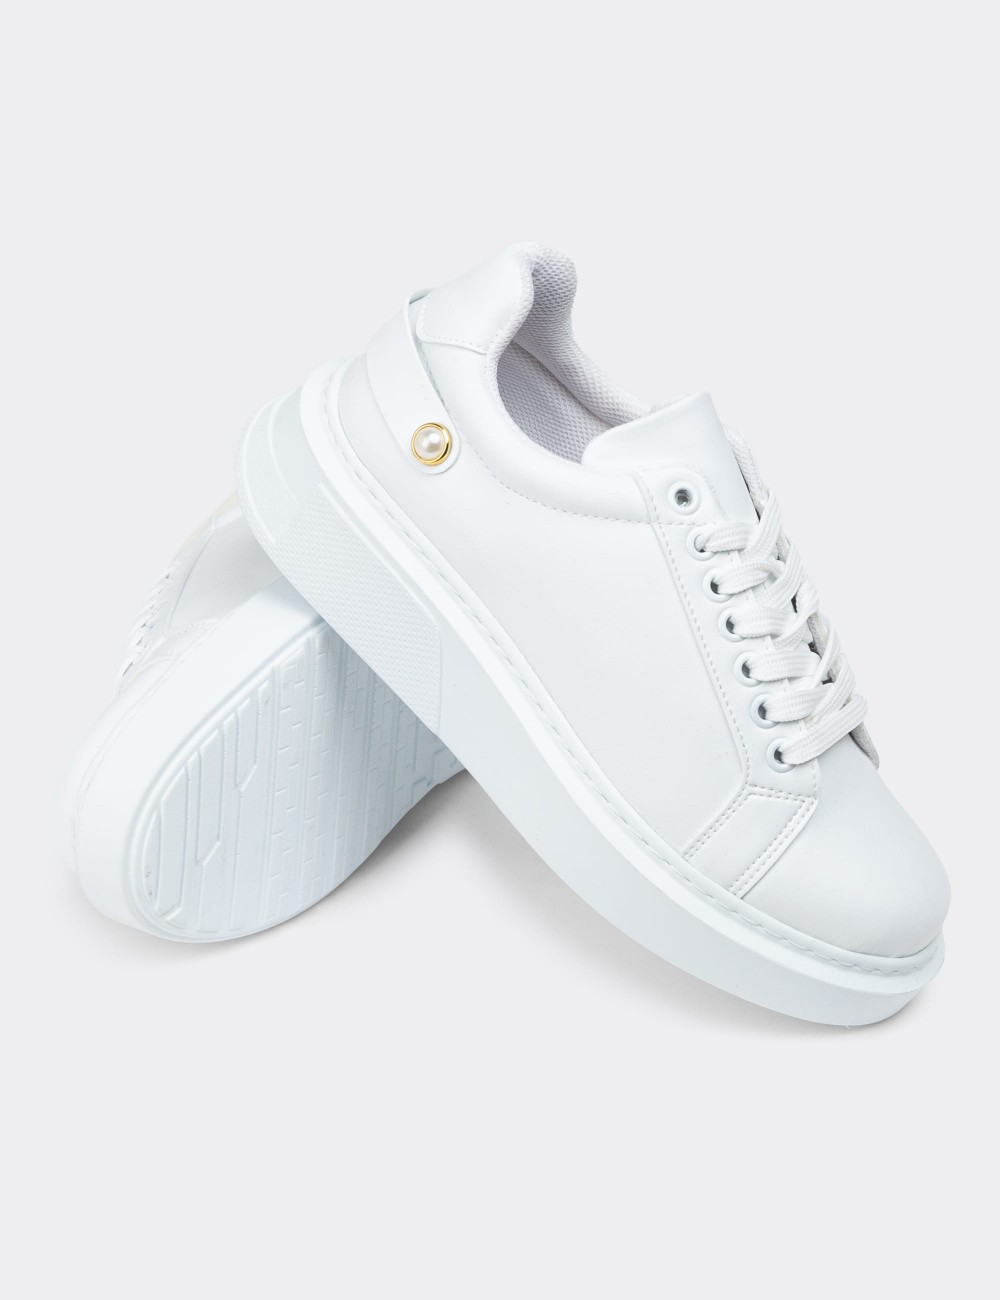 White Sneakers - RM502ZBYZC01